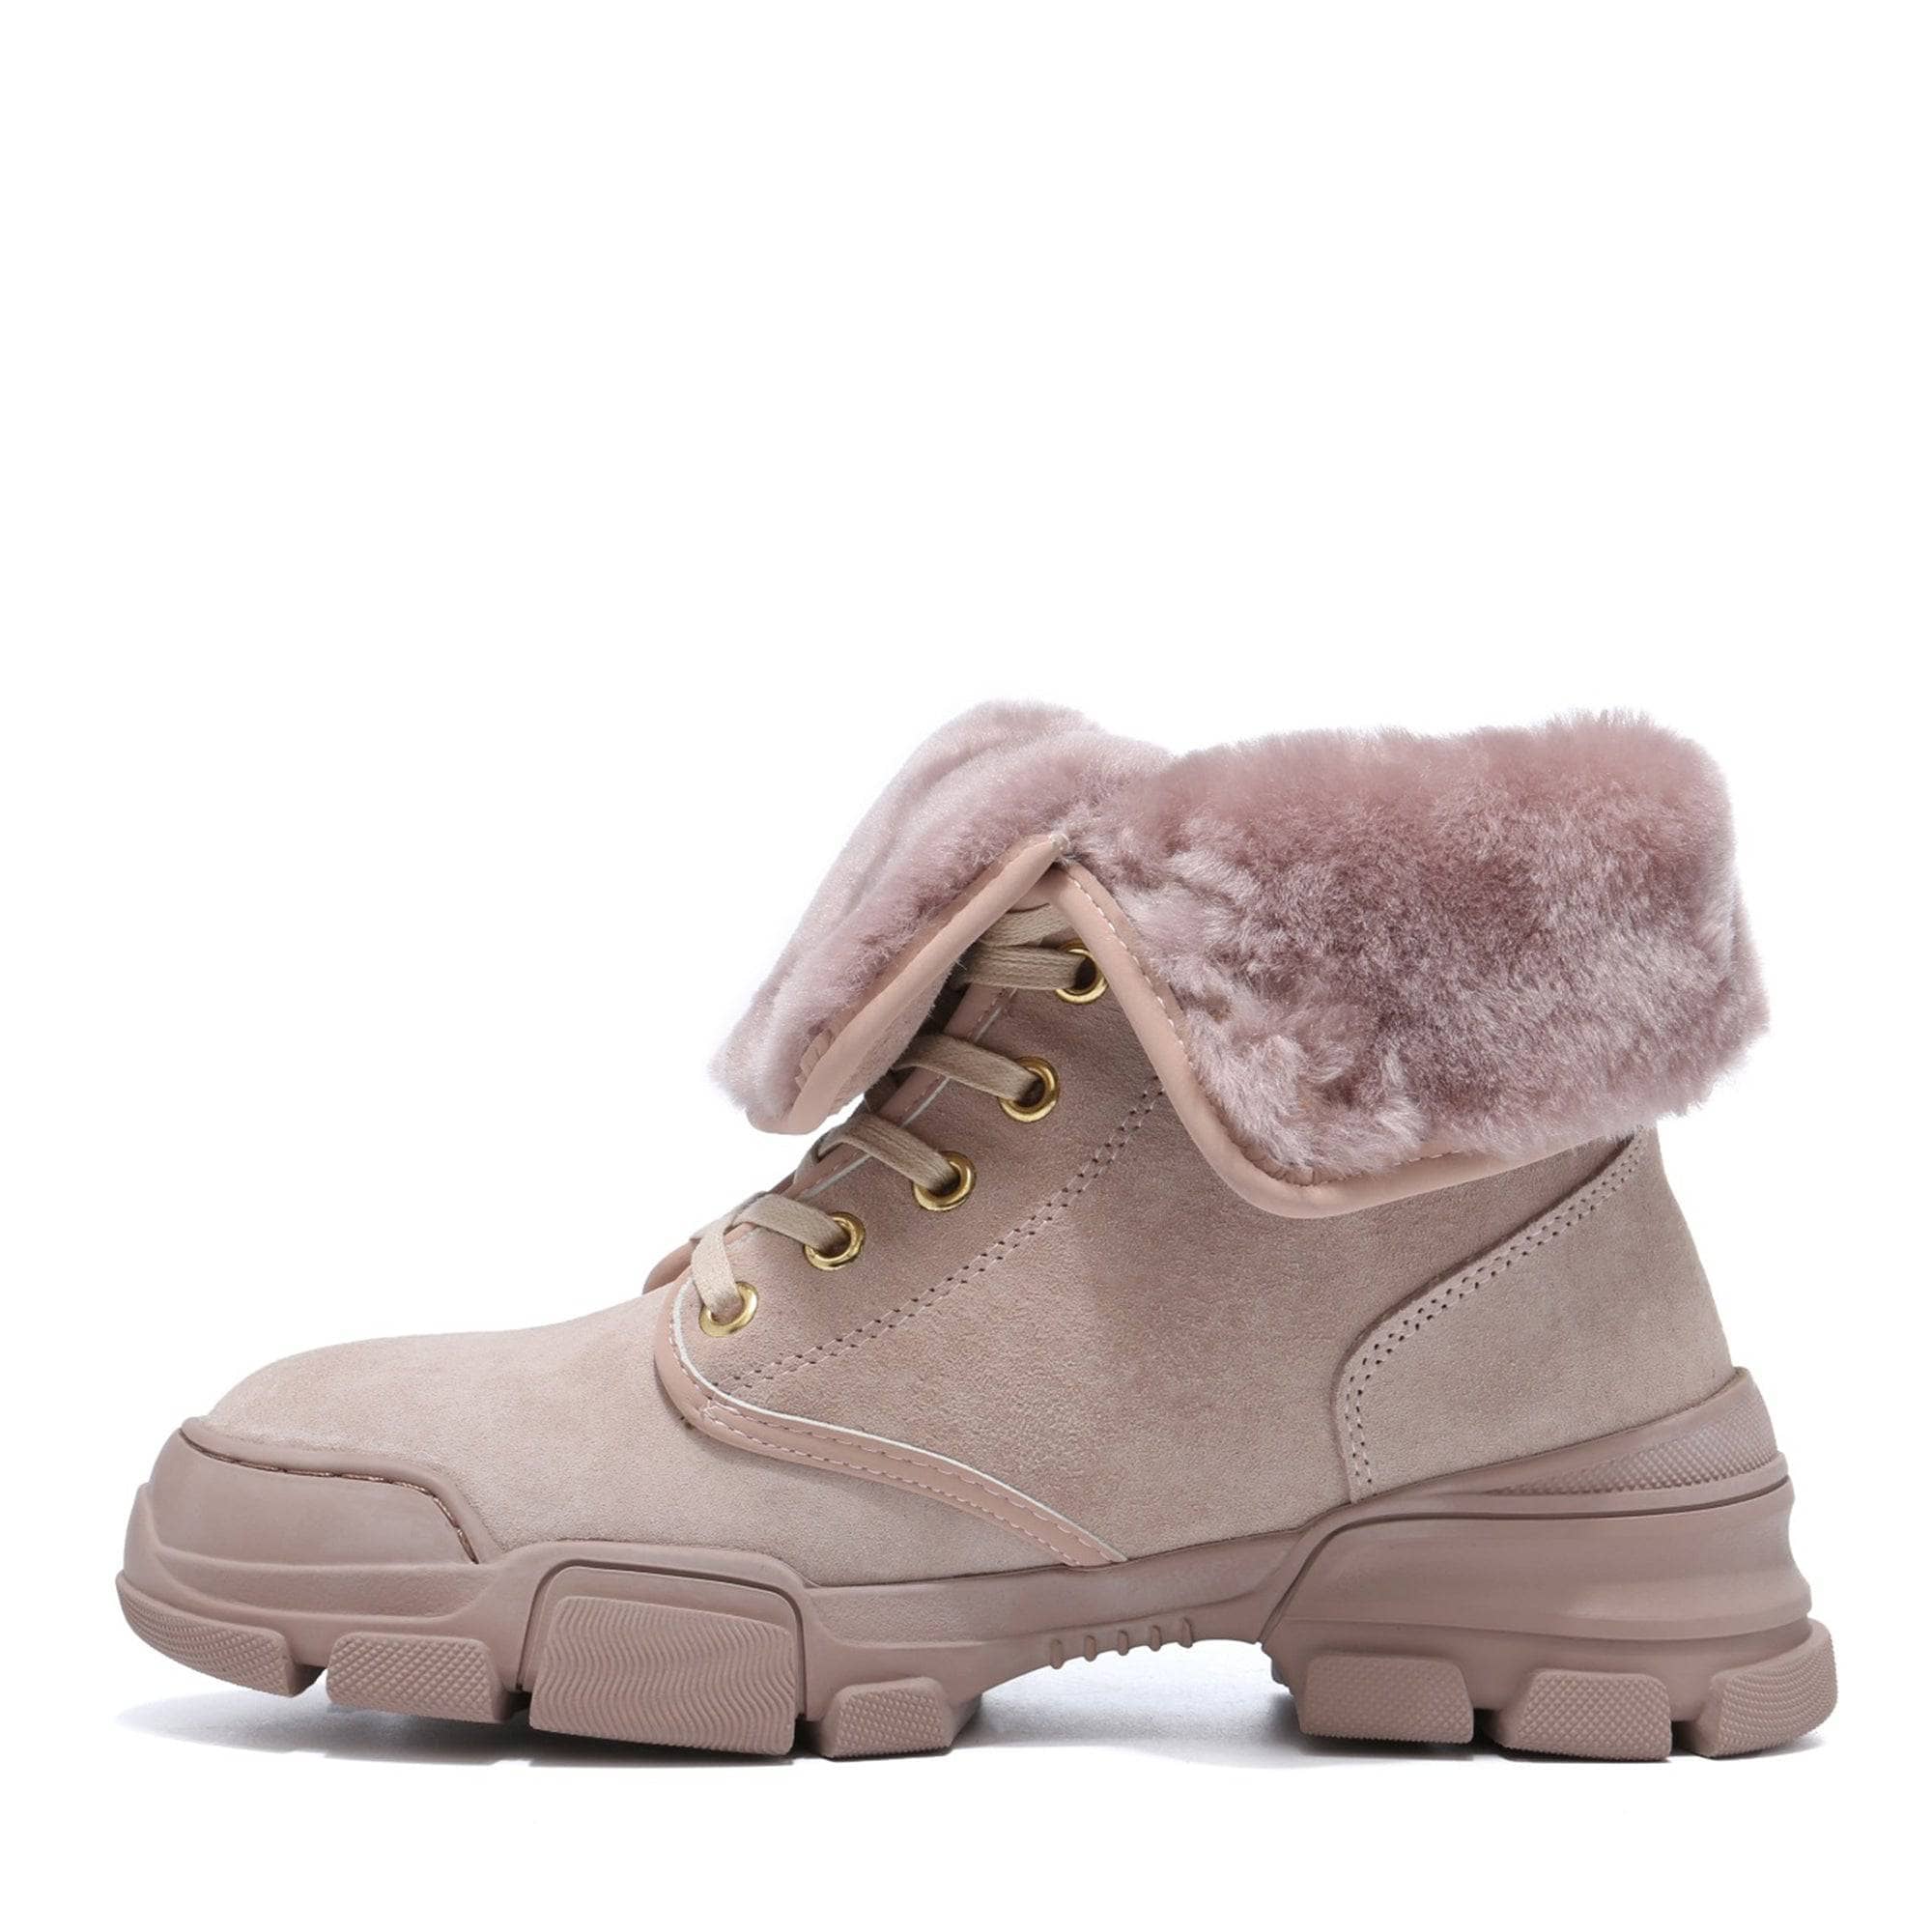 Outdoor Ugg Boots - UGG Jane Lace Up Boots - Original UGG Australia Classic